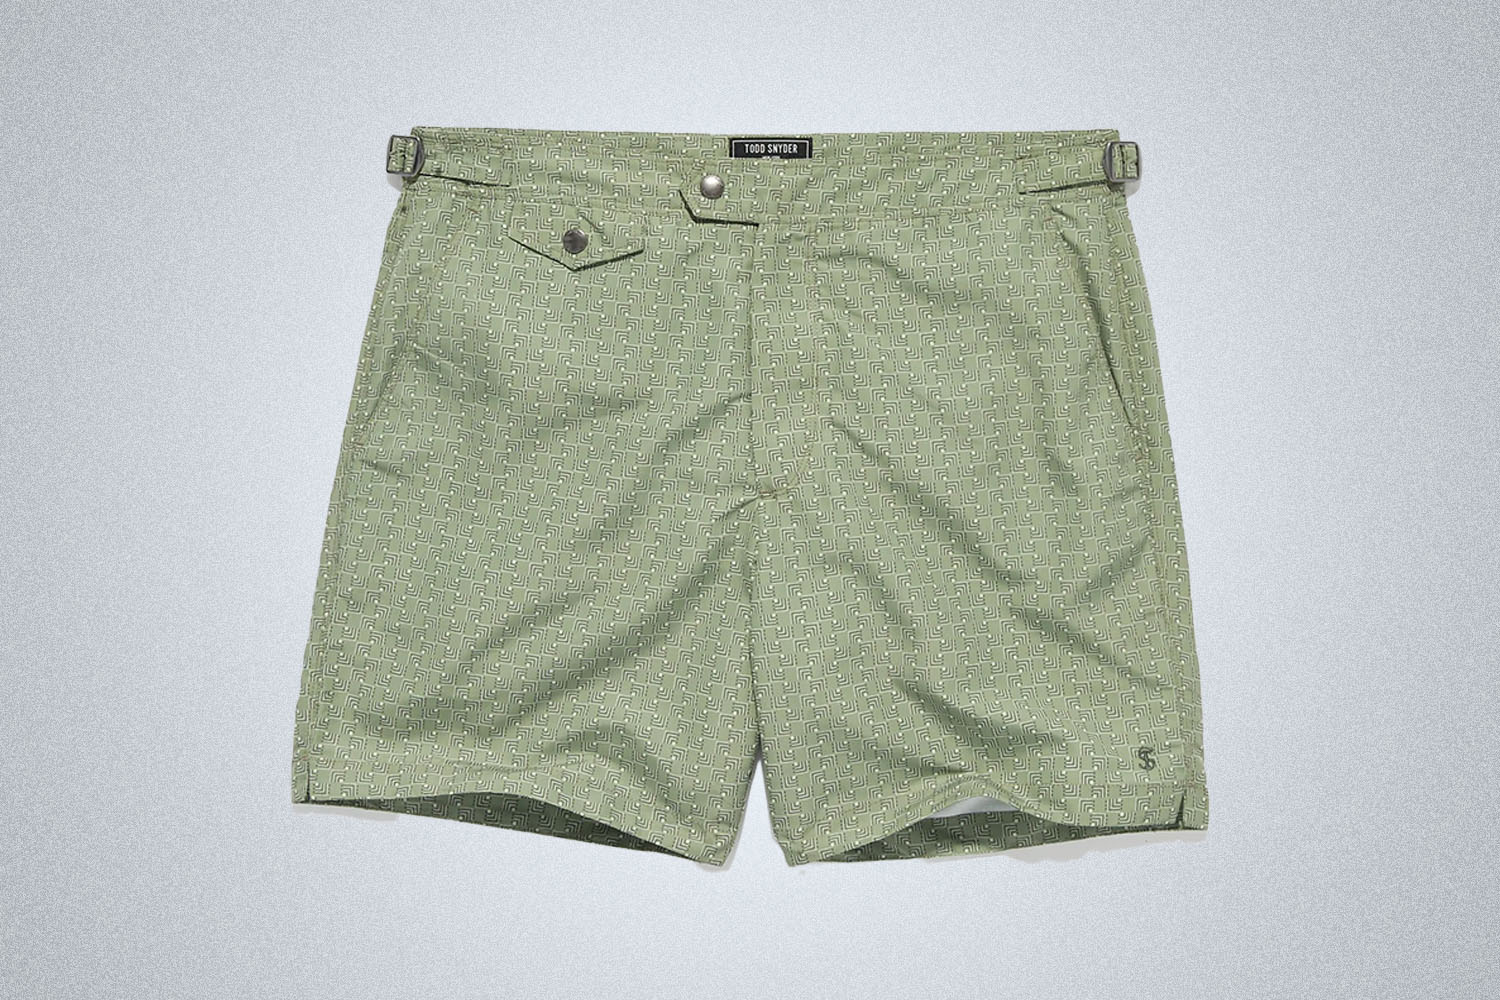 a pair of green patterned swim trunks from Todd Snyder on a grey background